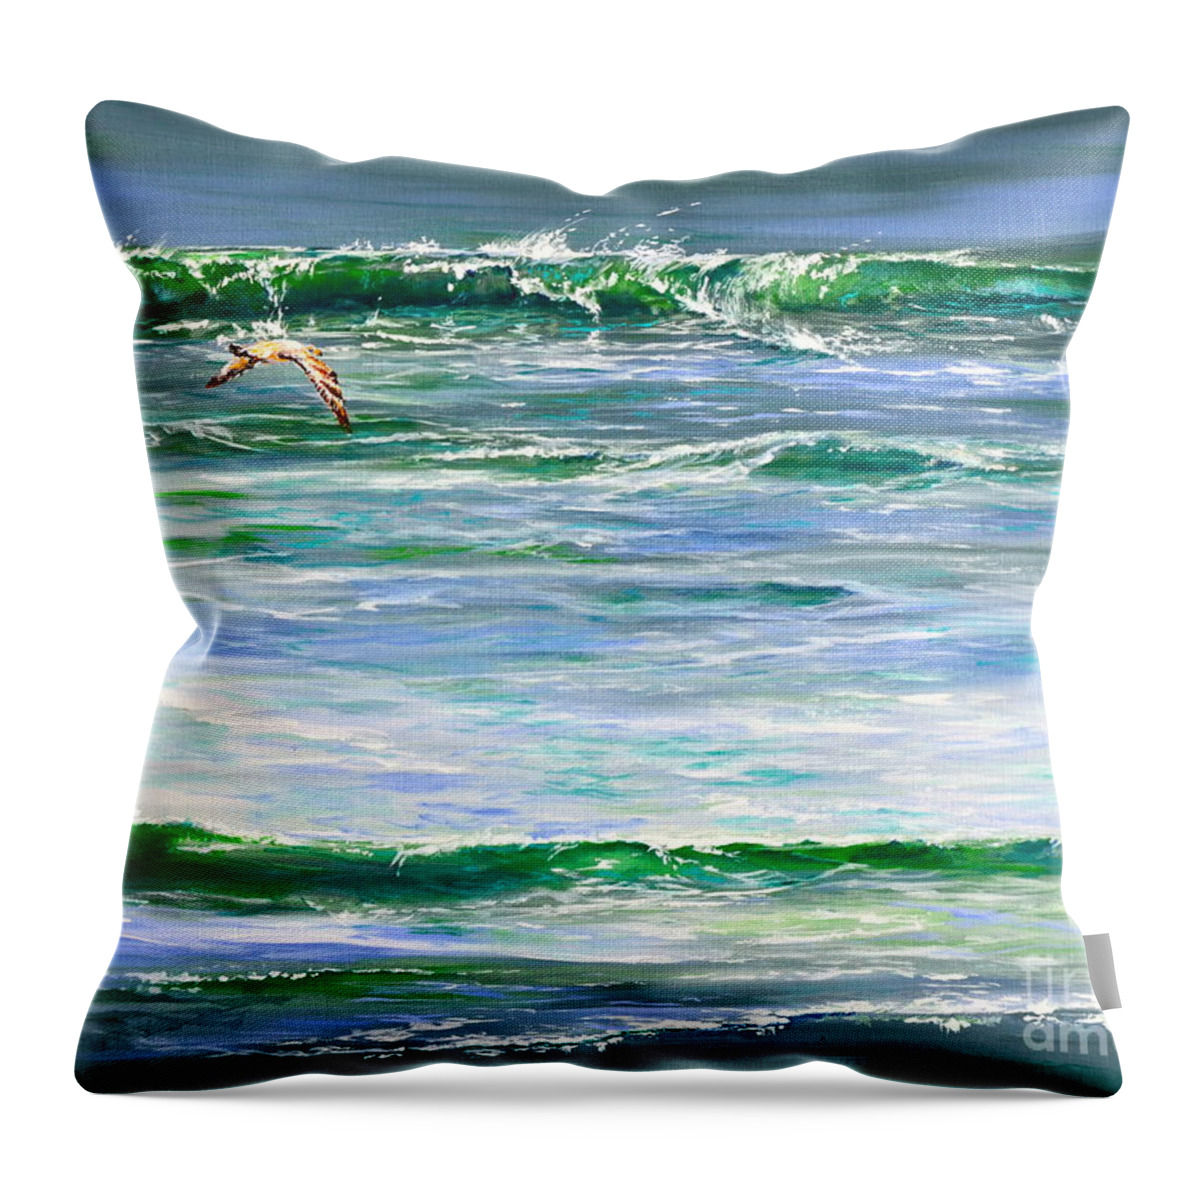 Green Throw Pillow featuring the painting Rolling Green by AnnaJo Vahle